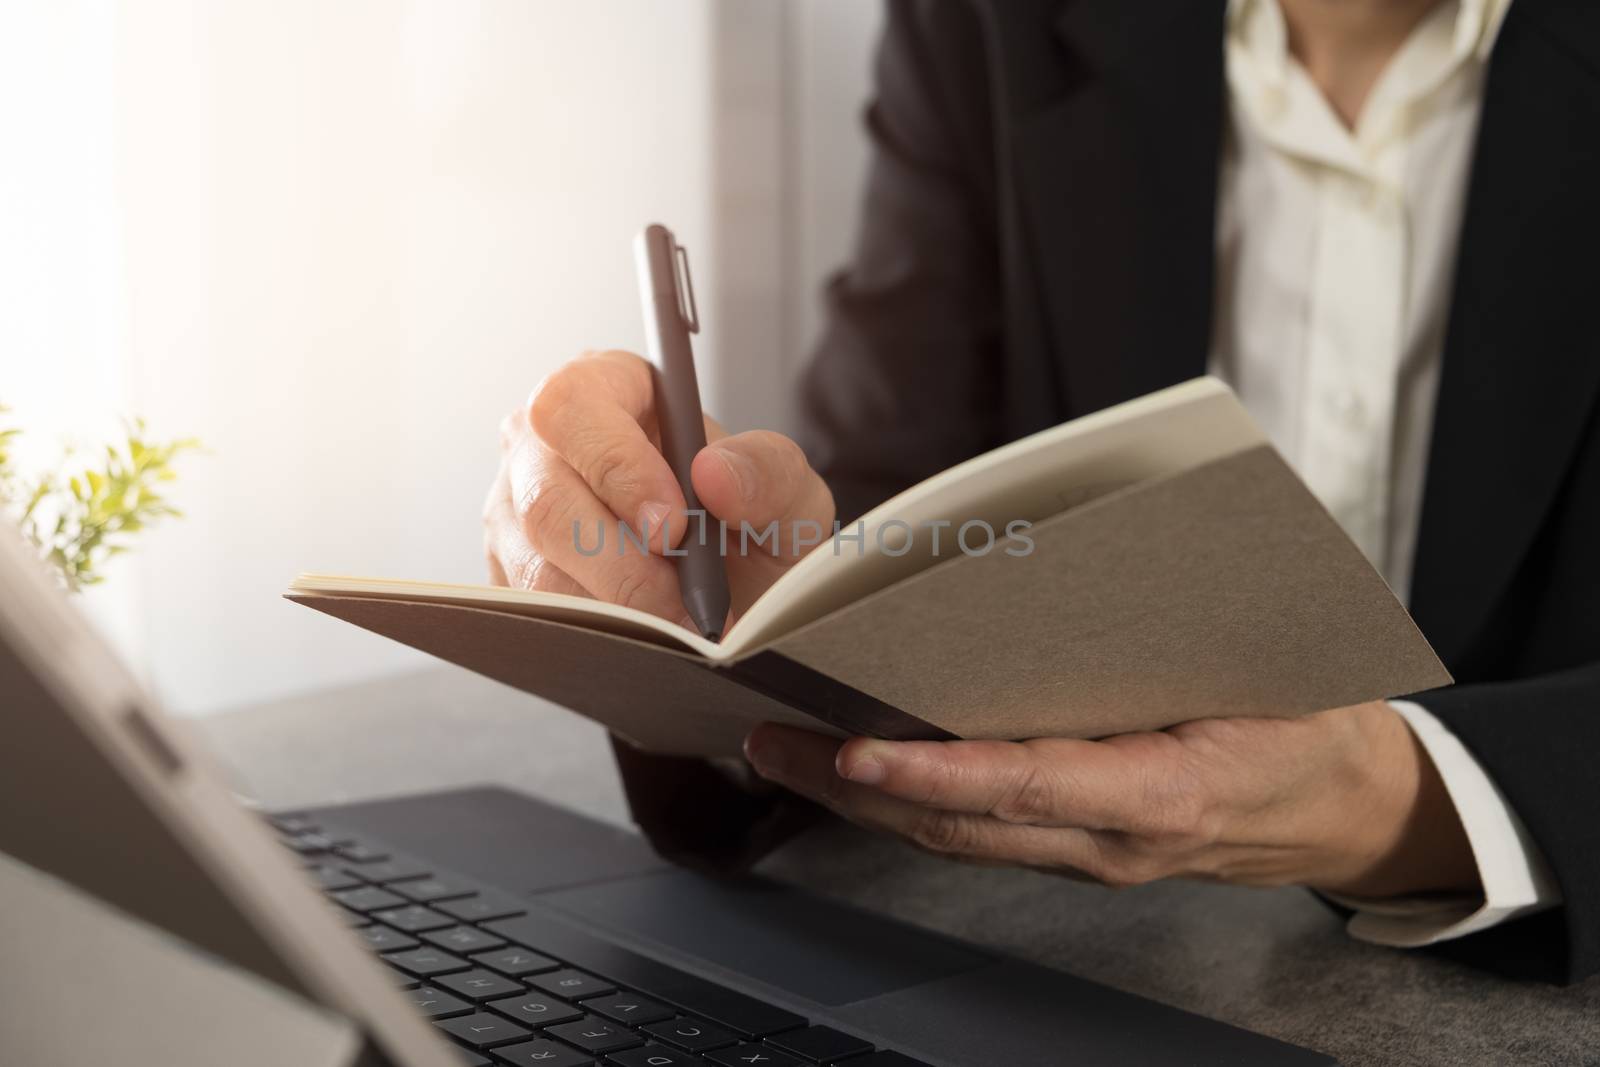 Businessmen holding a pen and writing a note in a notebook in office.